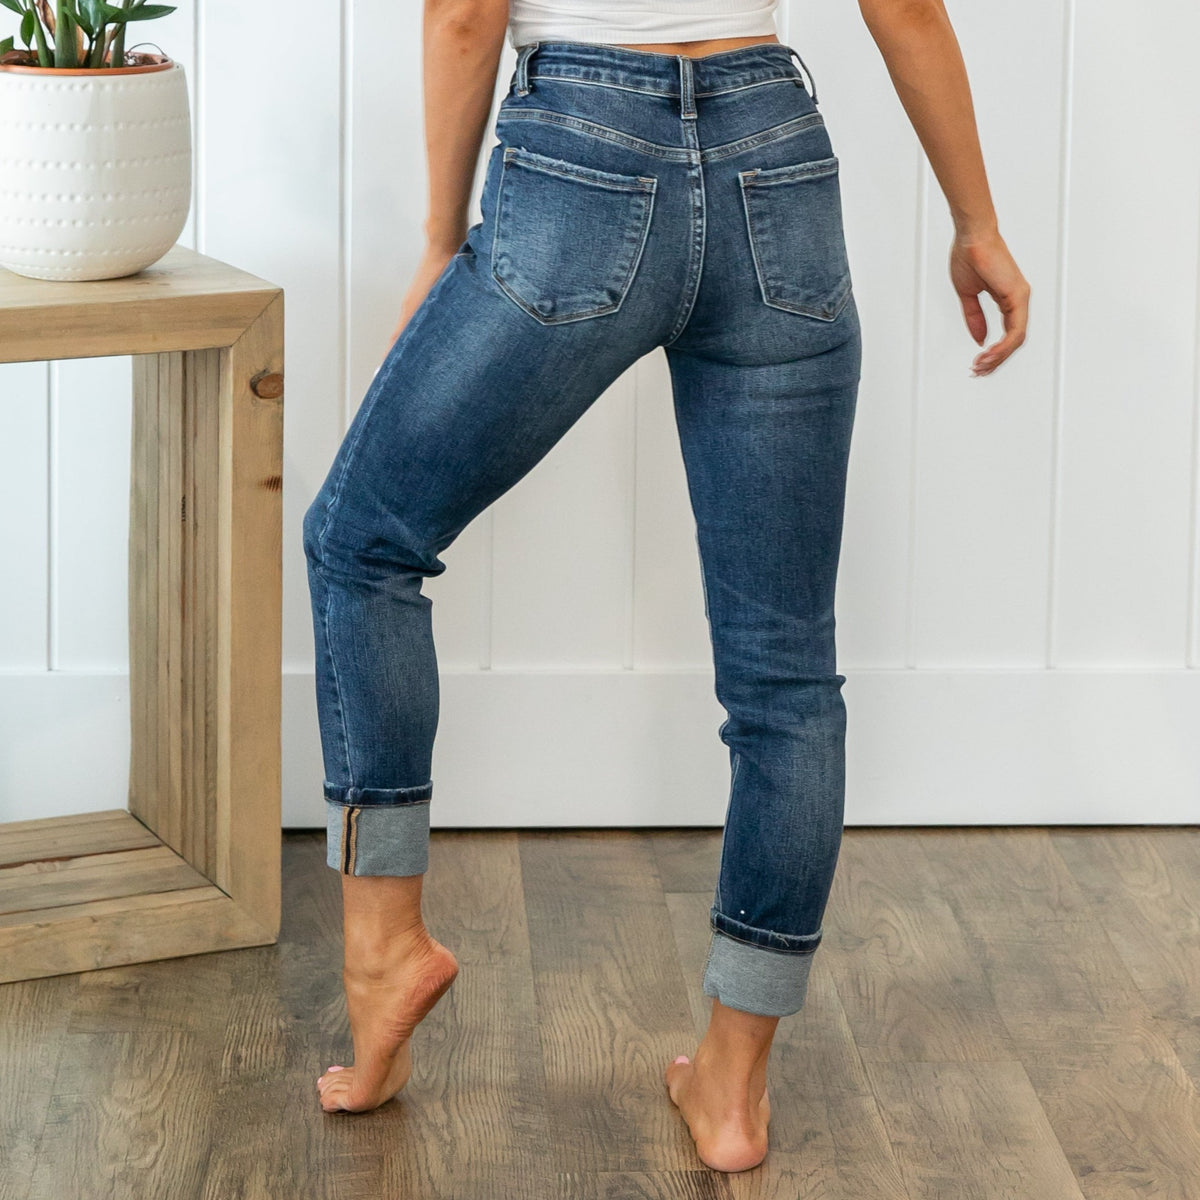 Risen Mid Rise Cuffed Straight Jeans